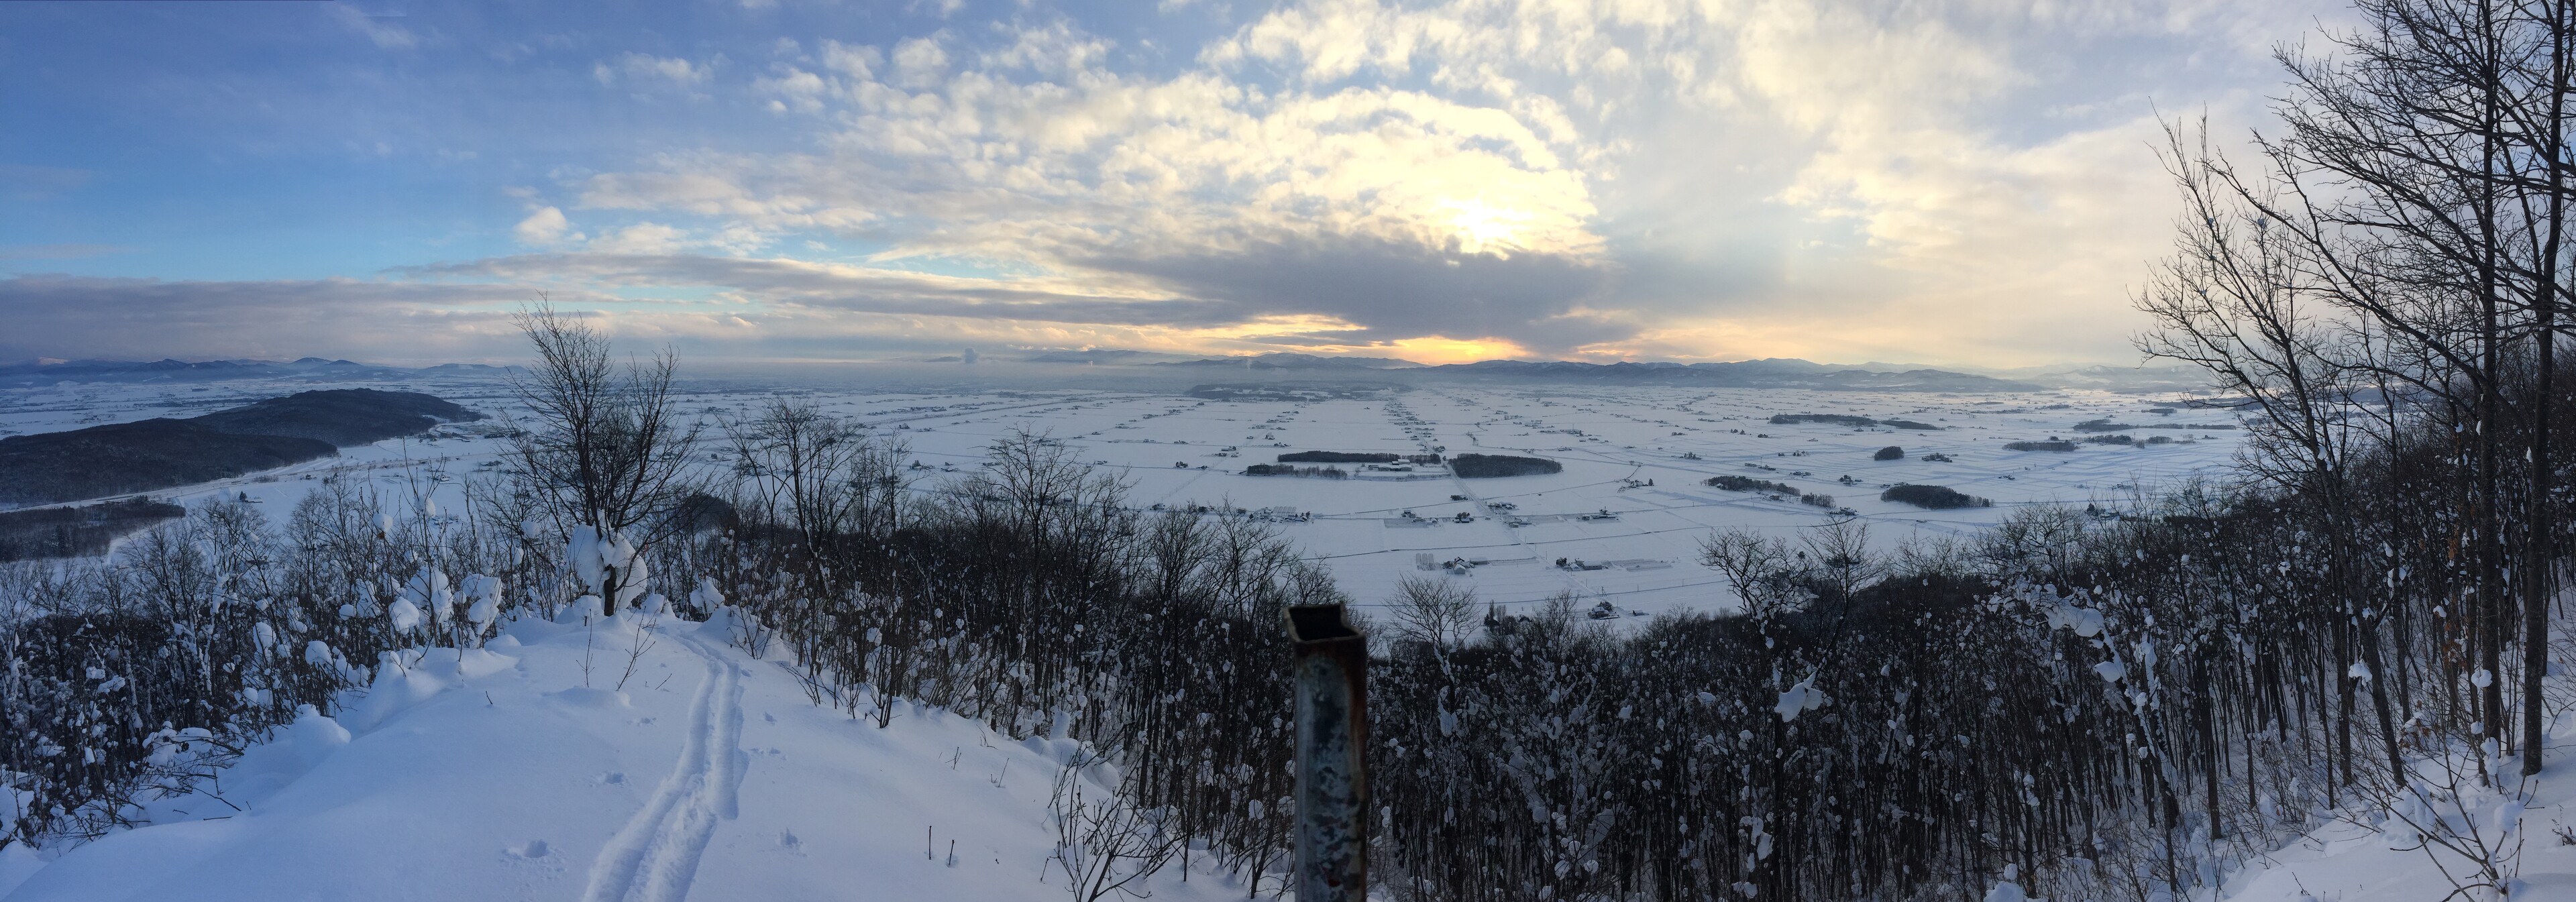 A panorama from the summit of the hill: snow and bare trees below, with my ski tracks coming up from bottom left. A late sun setting behind some clouds in the distance.